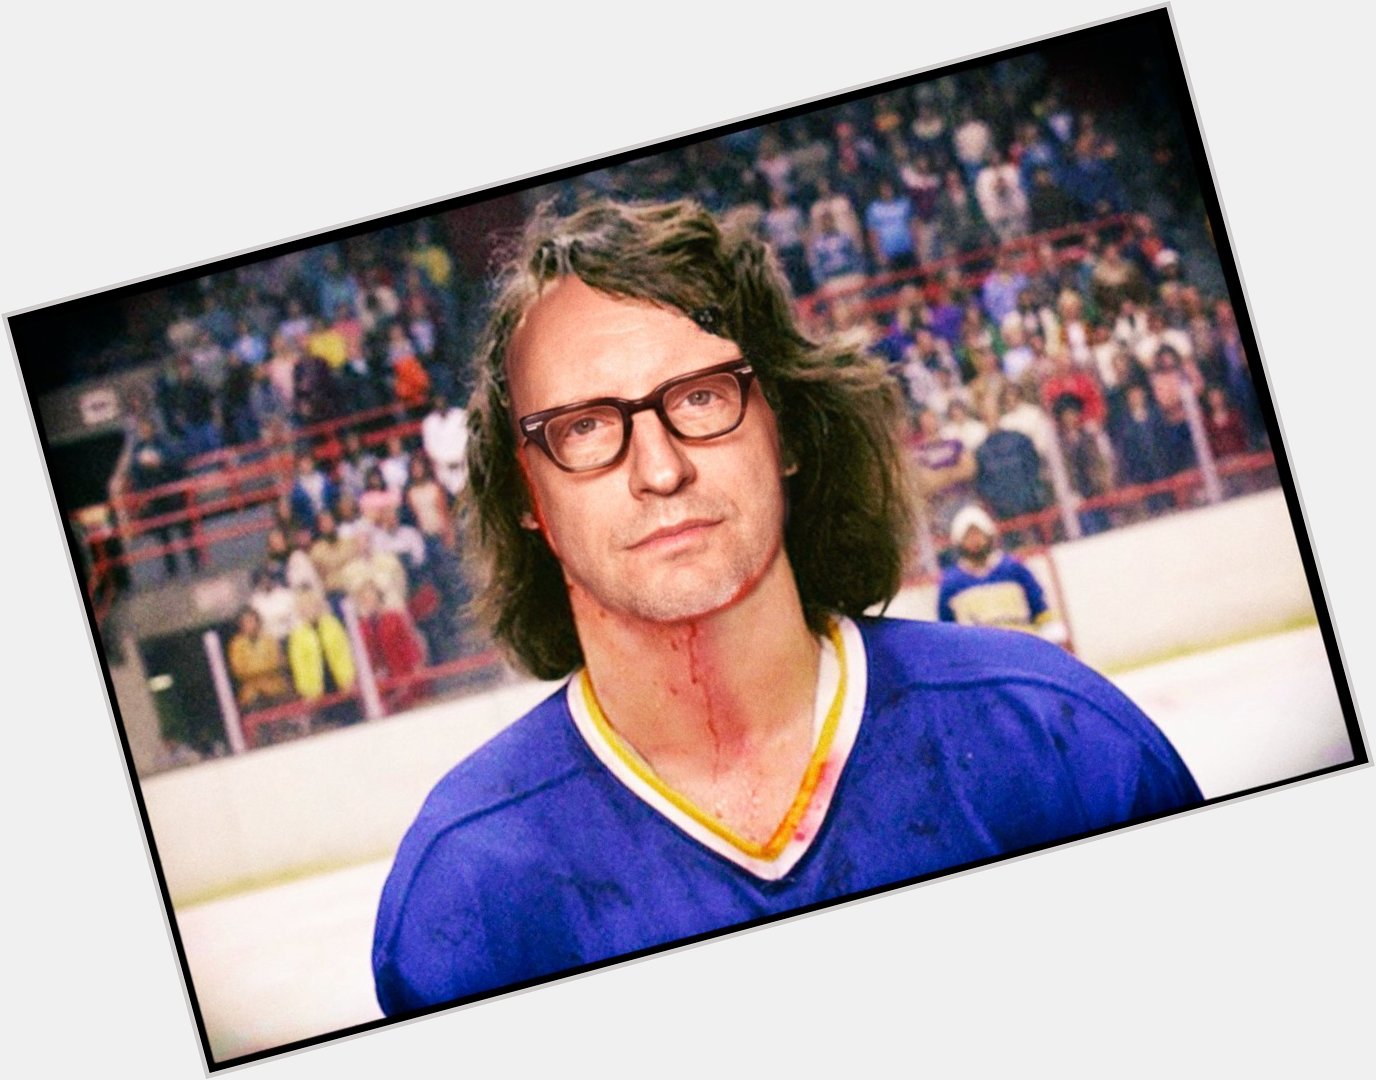 Happy 60th bday to Steven Soderbergh!
AKA the fourth Hanson brother 